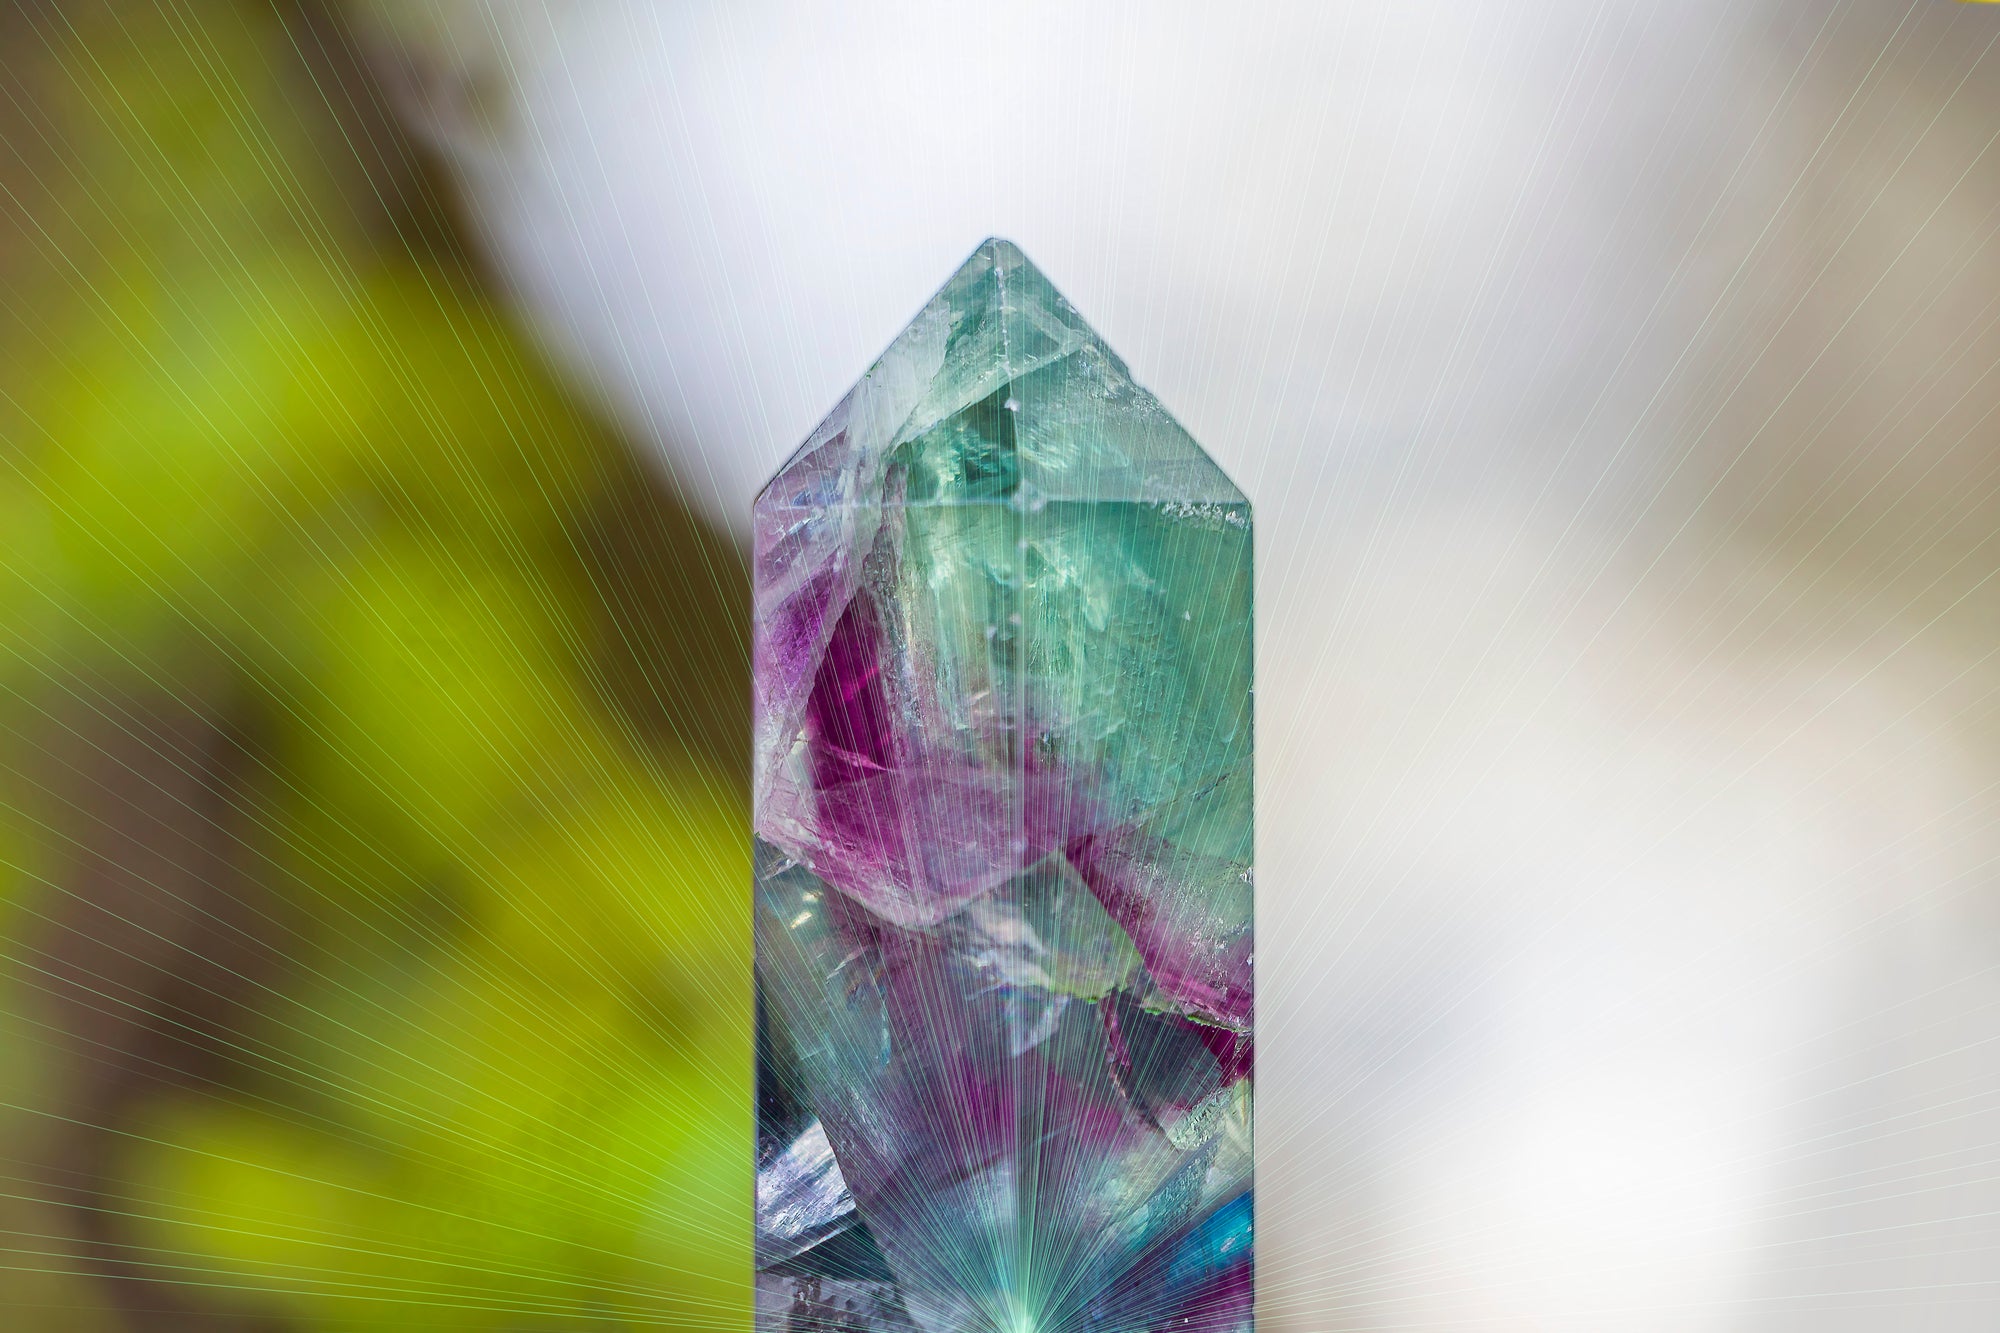 How to charge crystals: An Important Part of Your Crystal's Upkeep